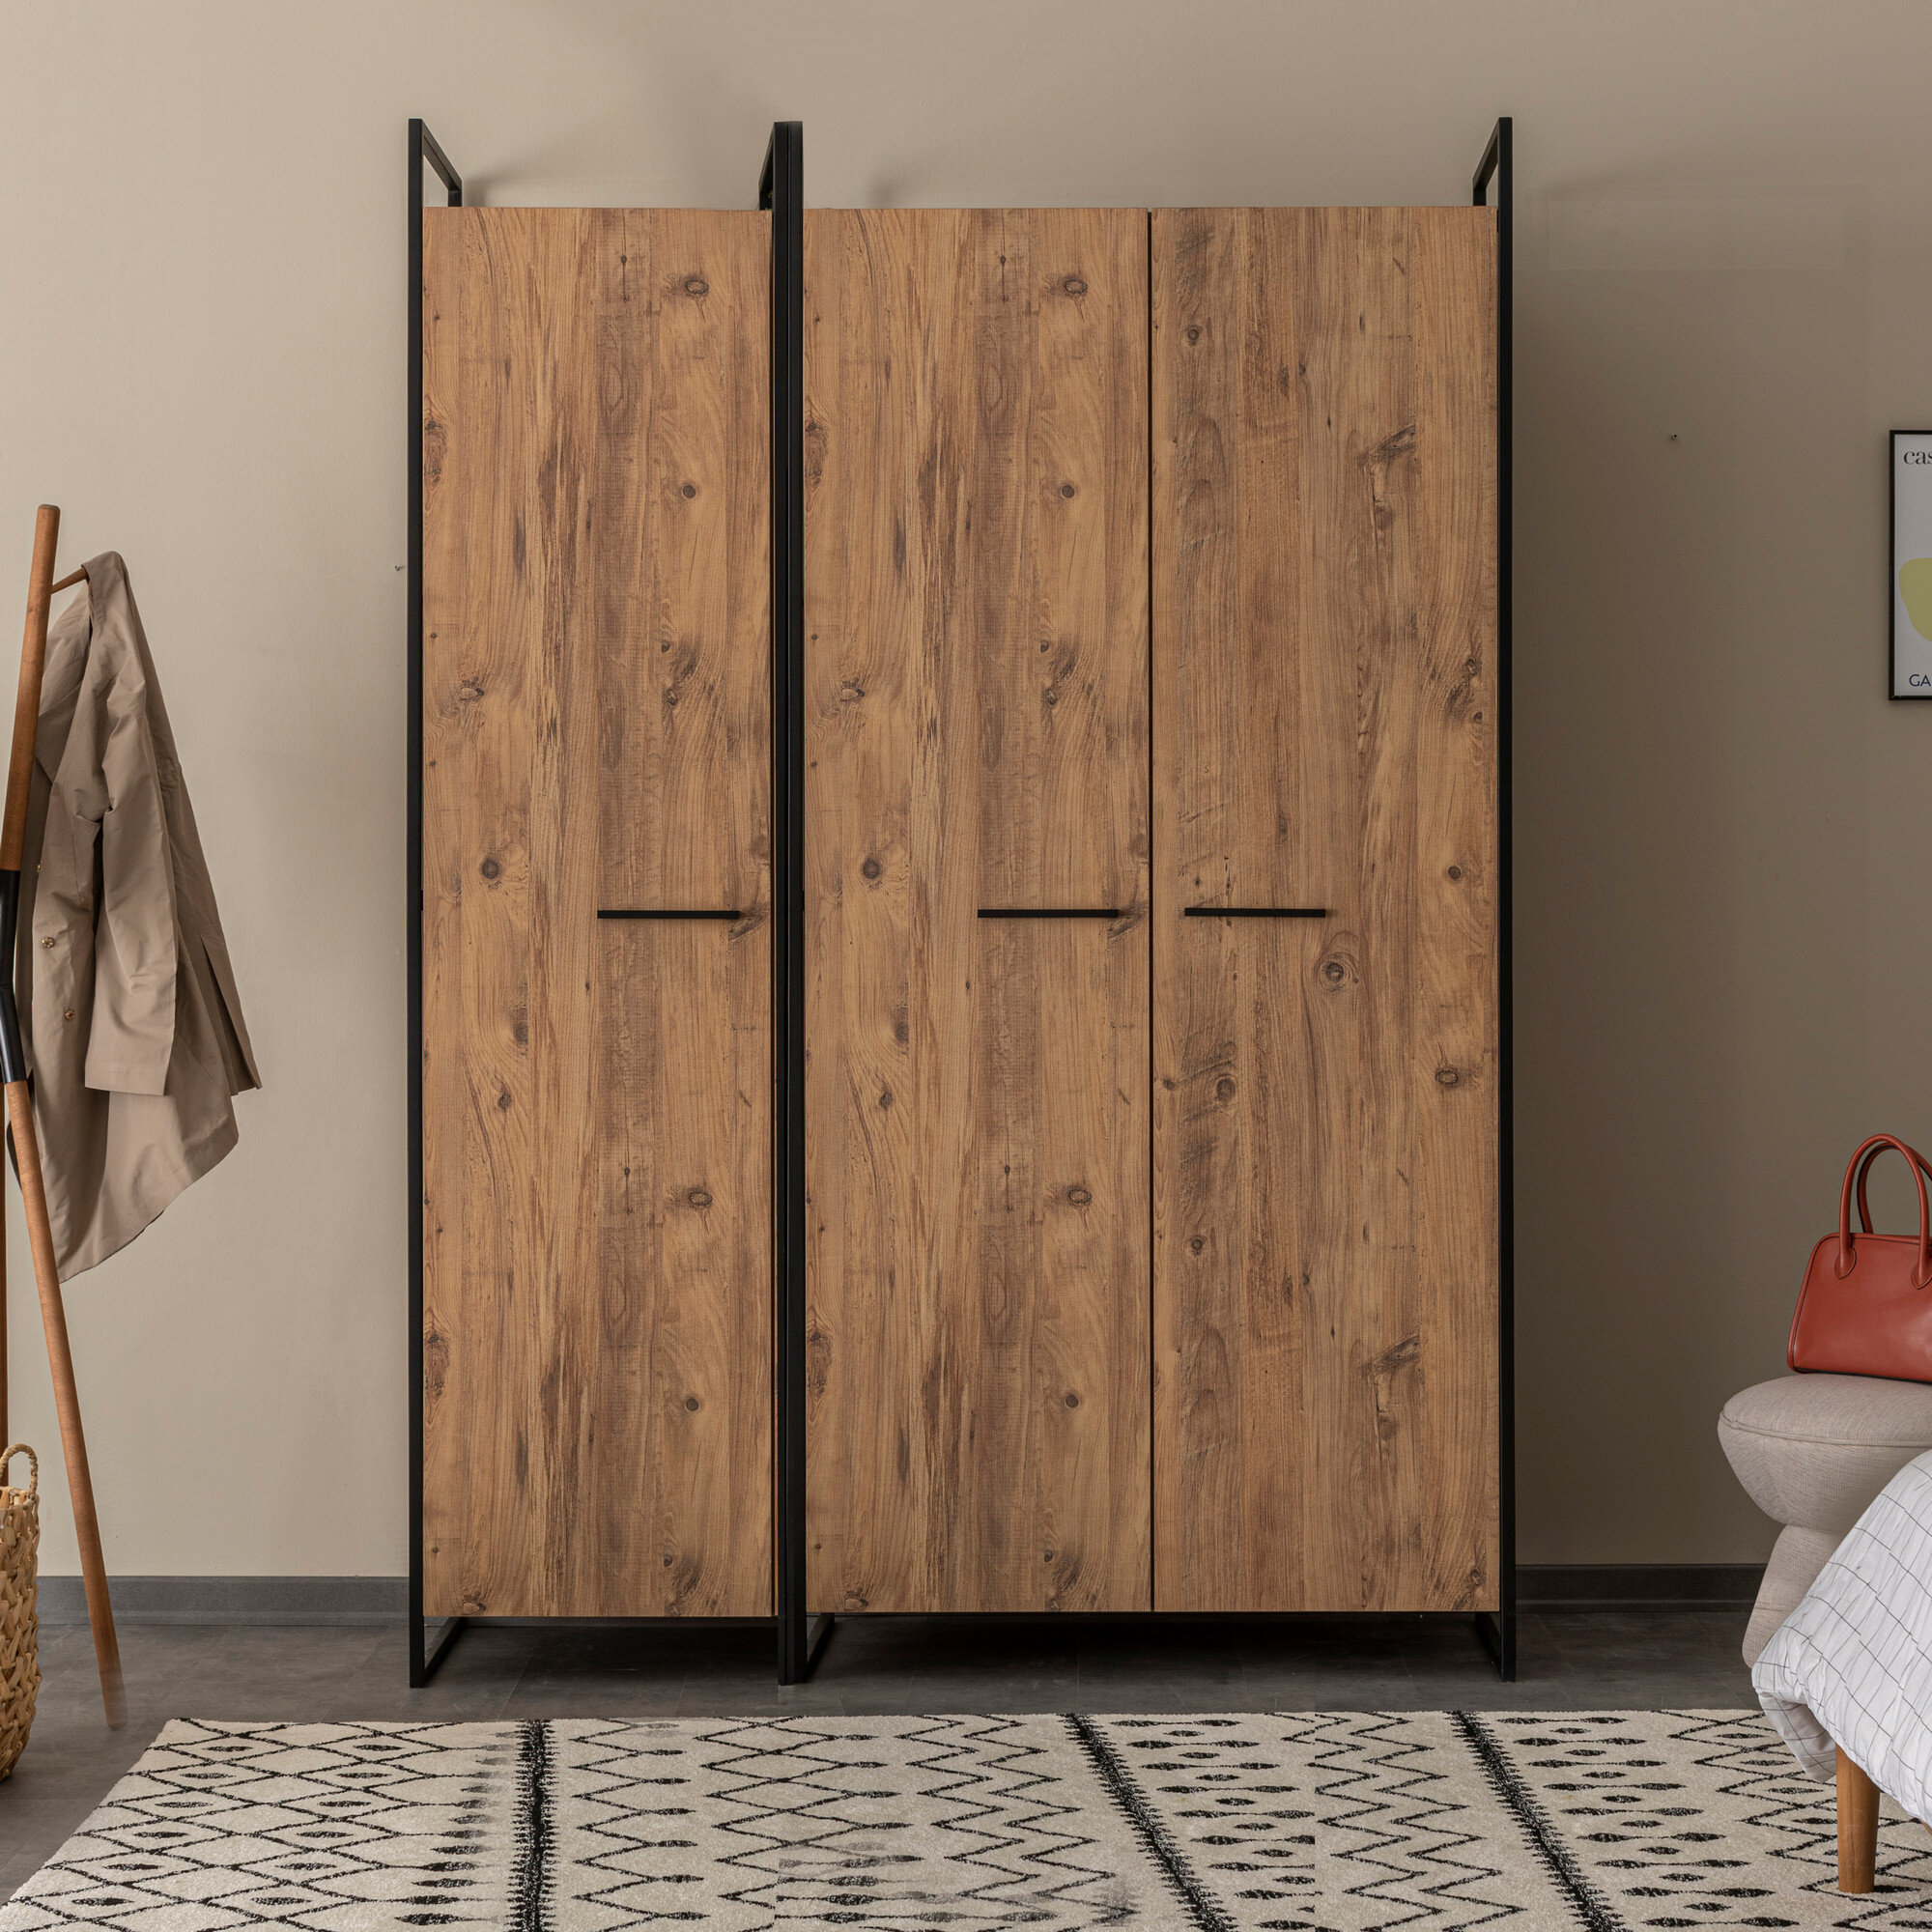 Georgia Rustic Solid Wood Wardrobe Armoire Closet with 4 Drawers.